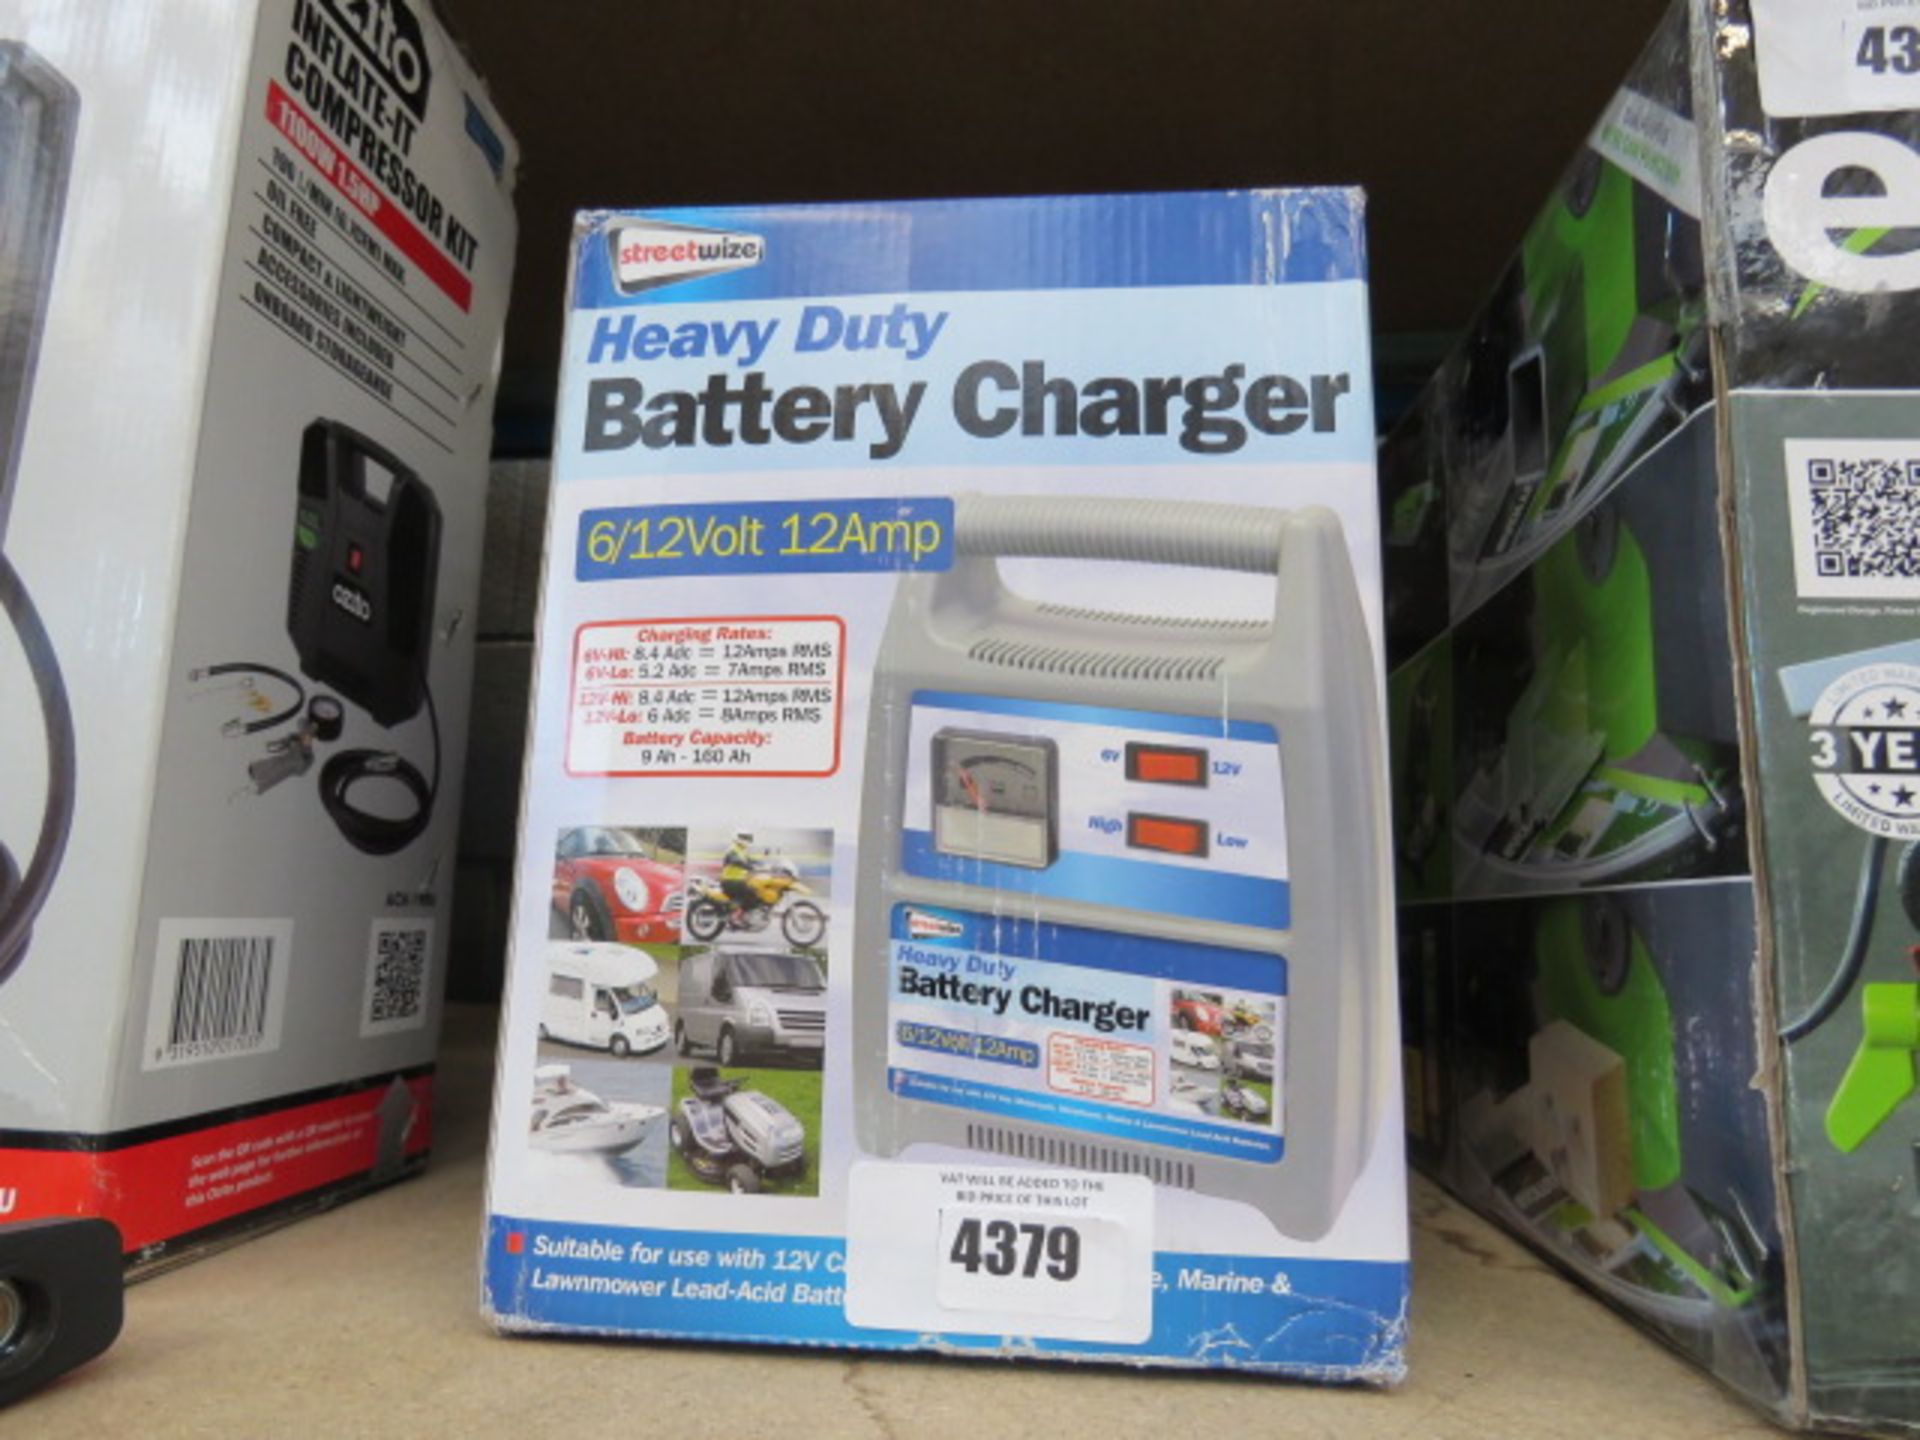 Streetwise heavy duty battery charger